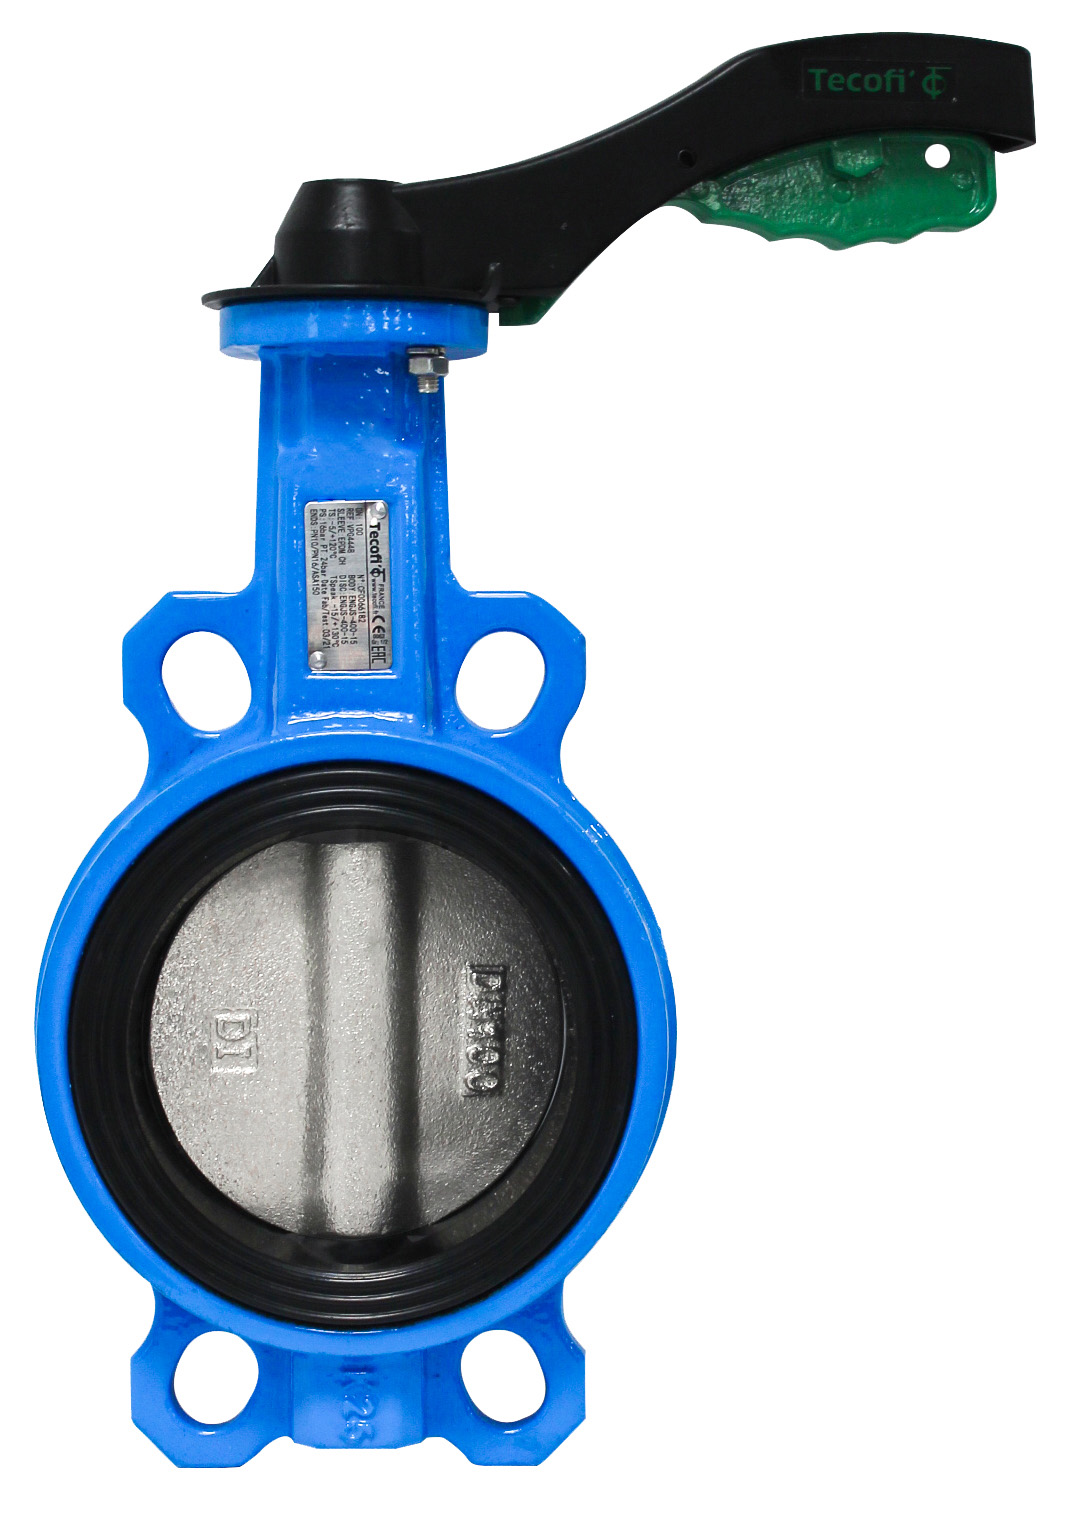 Butterfly valve wafer PN16 – ductile iron body and disc – EPDM